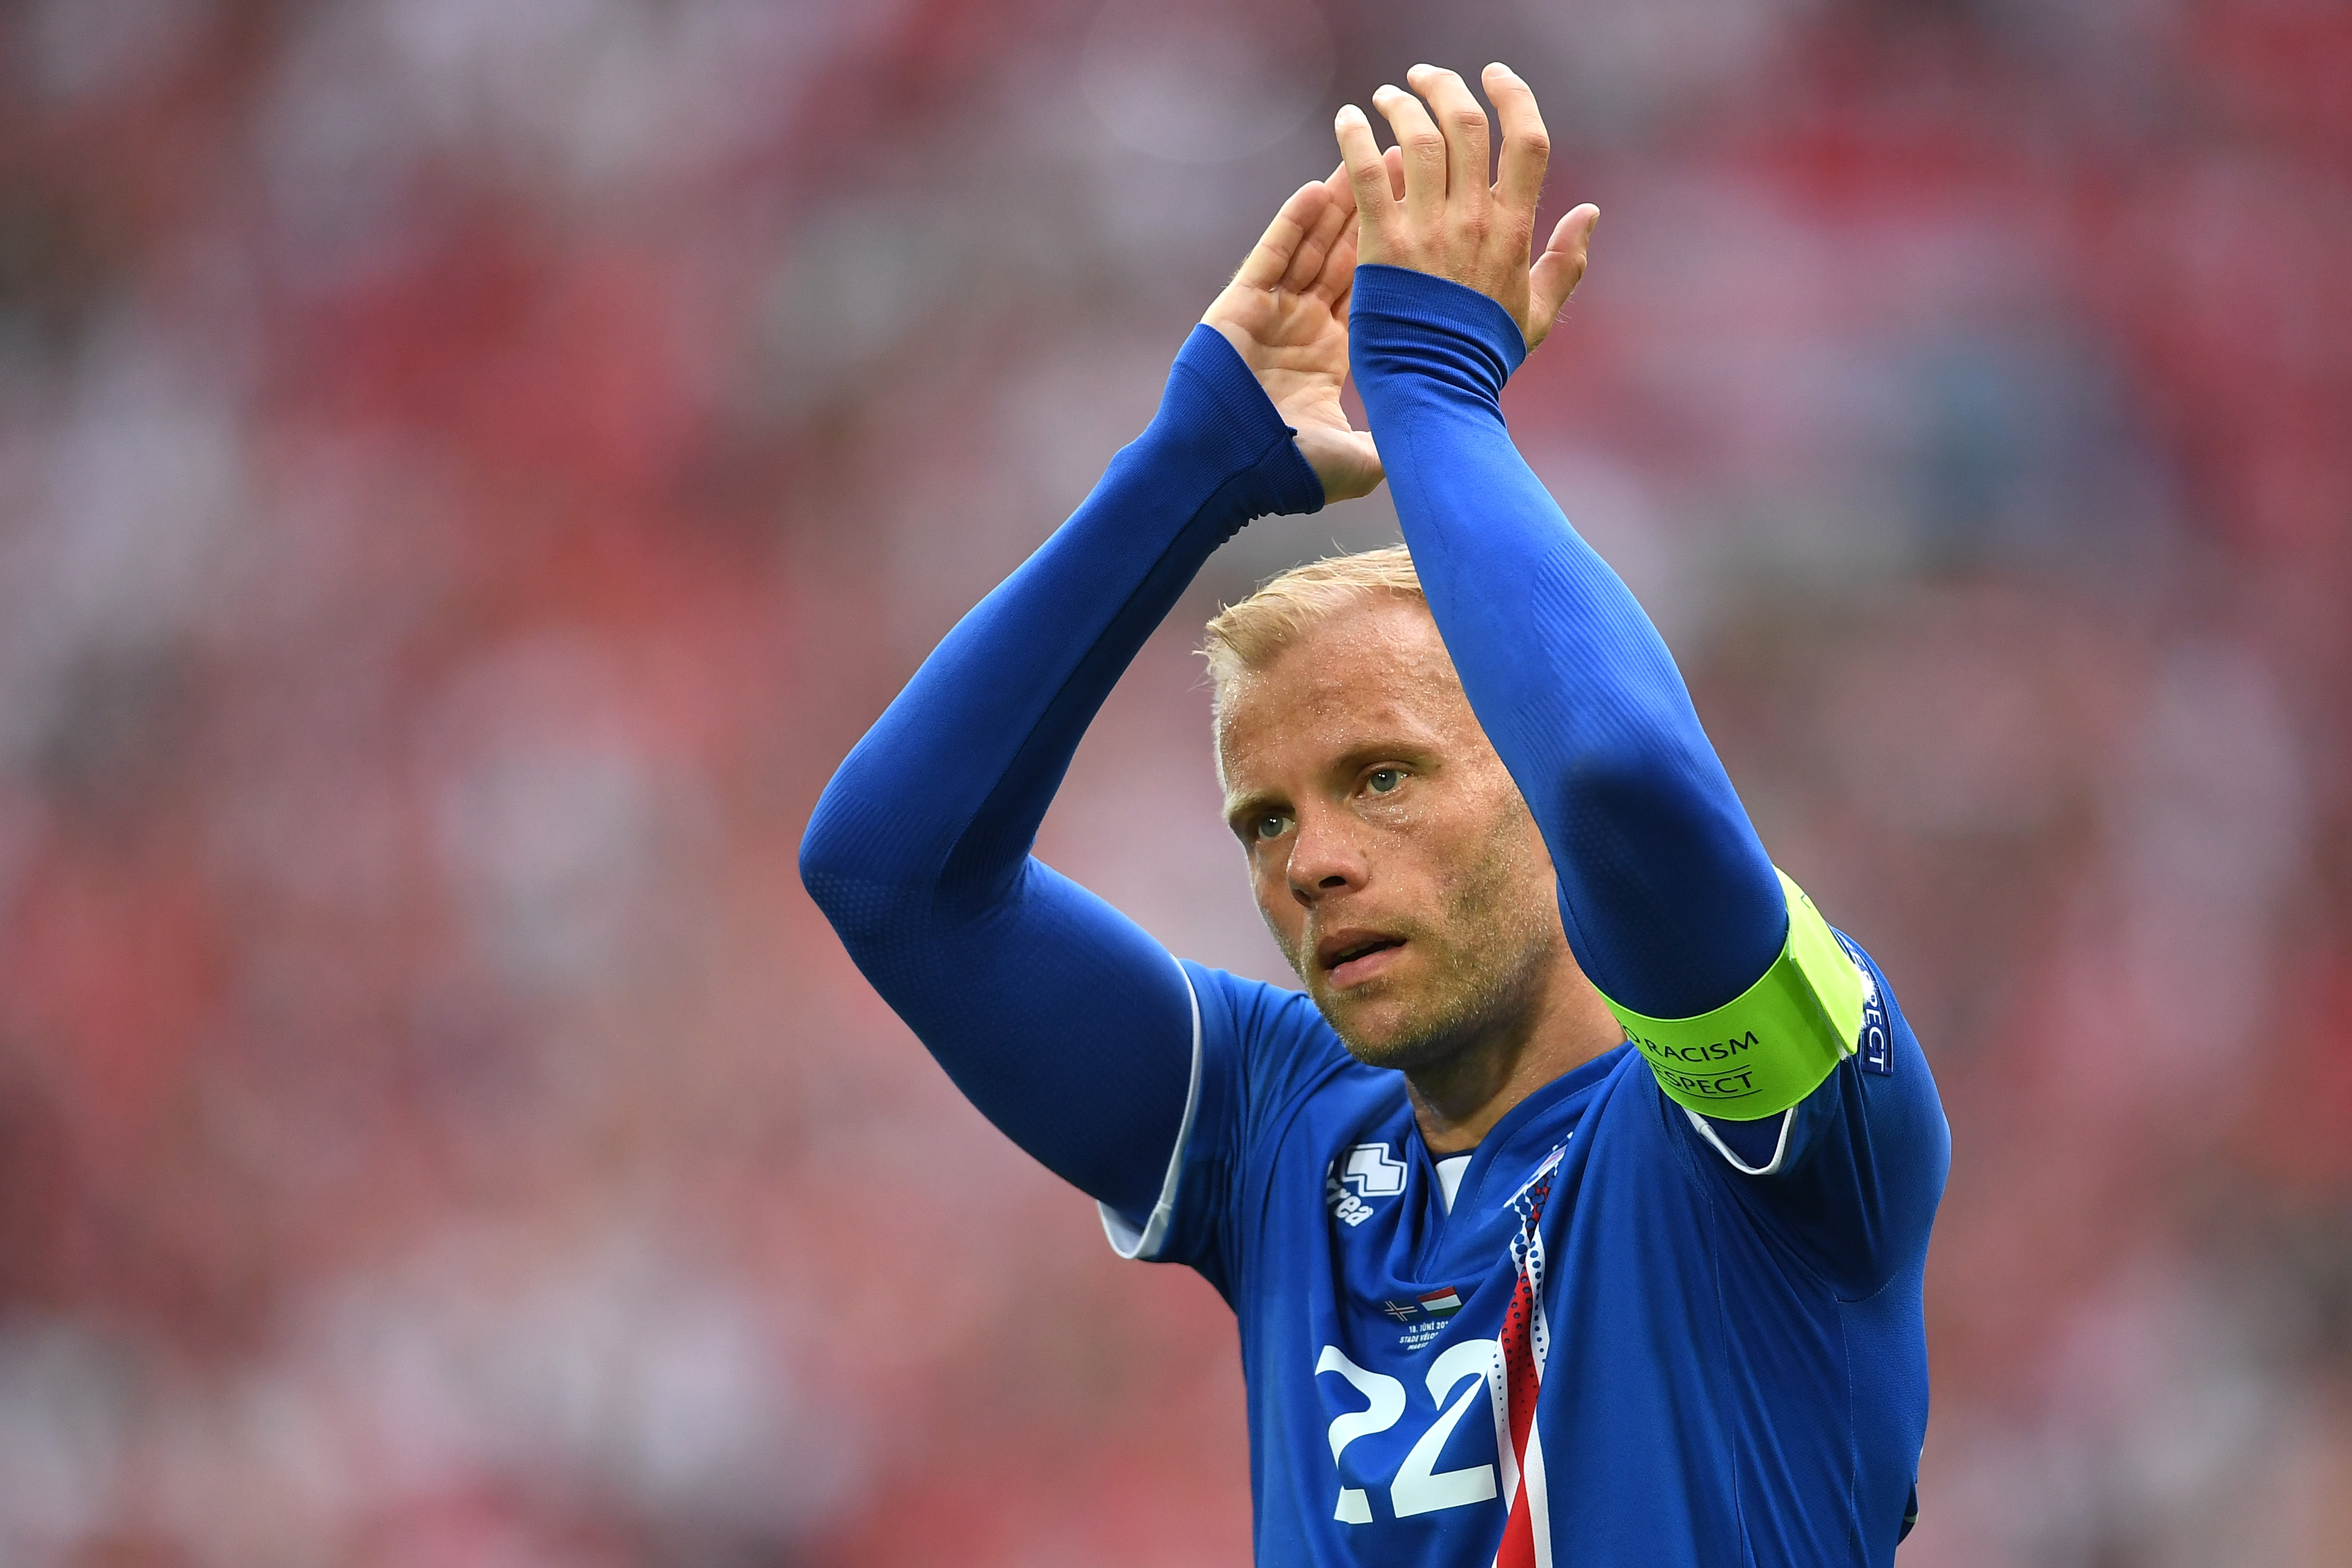 Eidur Gudjohnsen applauds Iceland fans after his side's game against Hungary at Euro 2016.